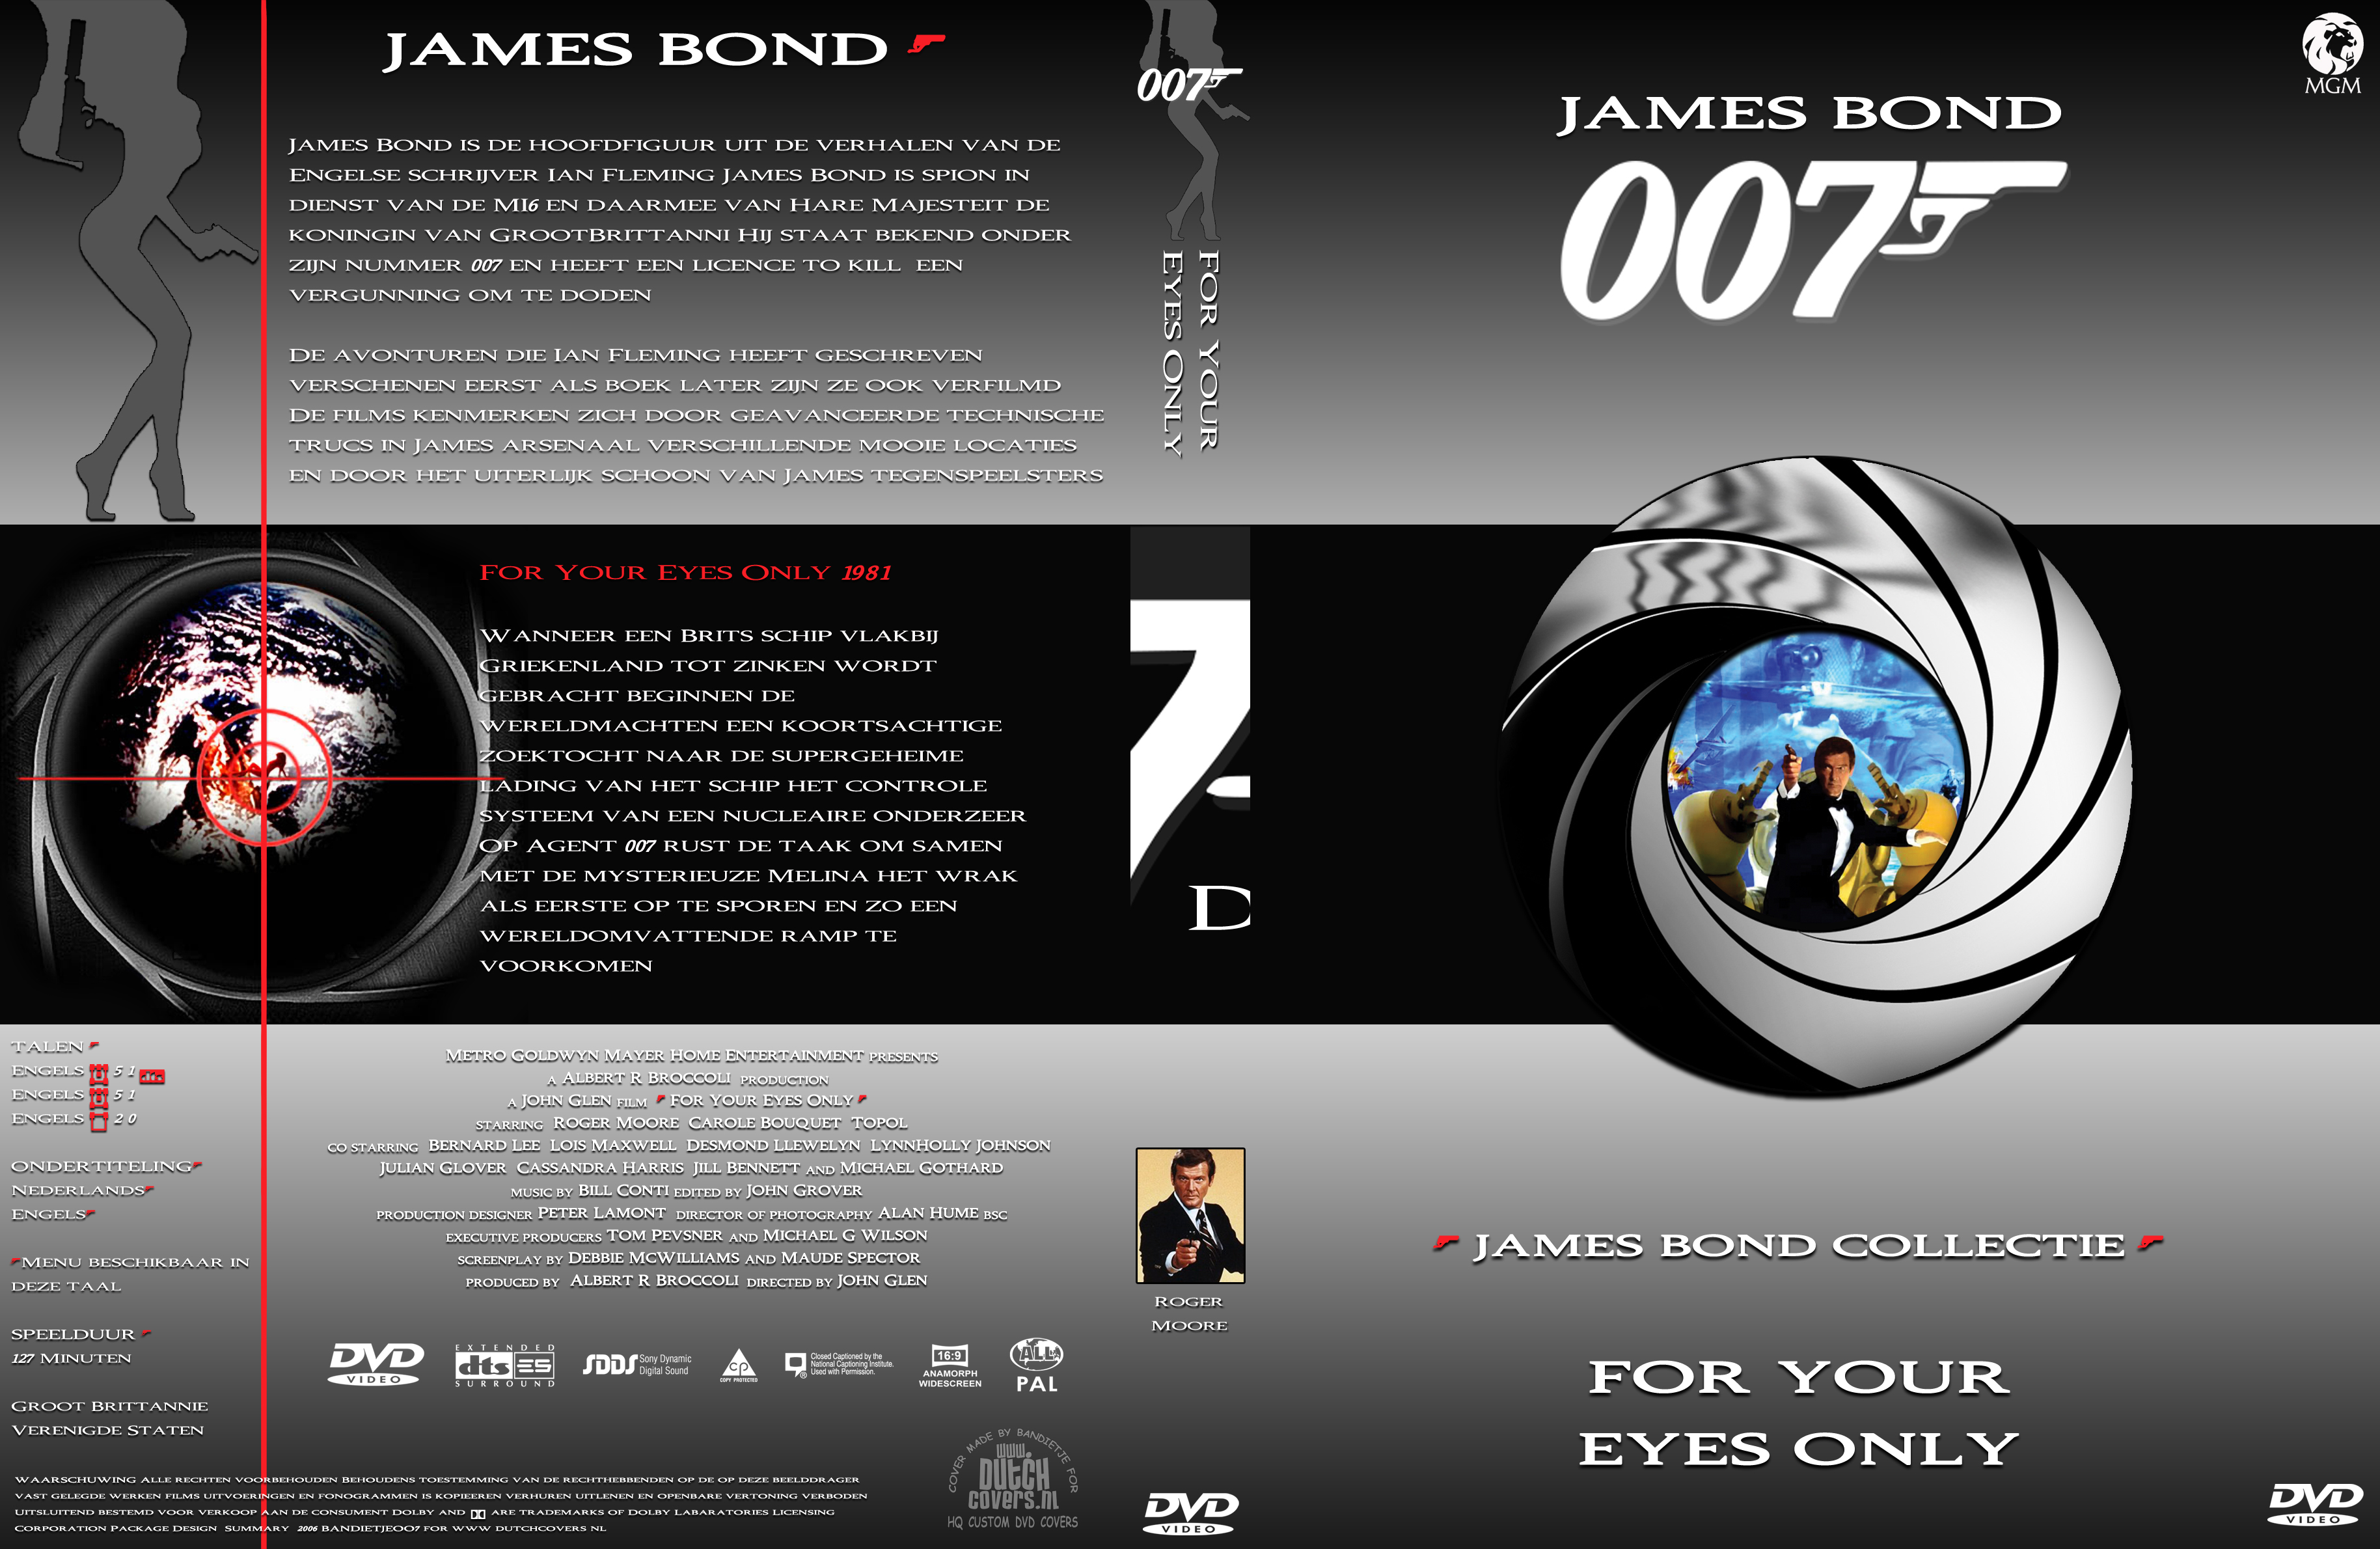 James Bond - 007 - 13 For Your Eyes Only